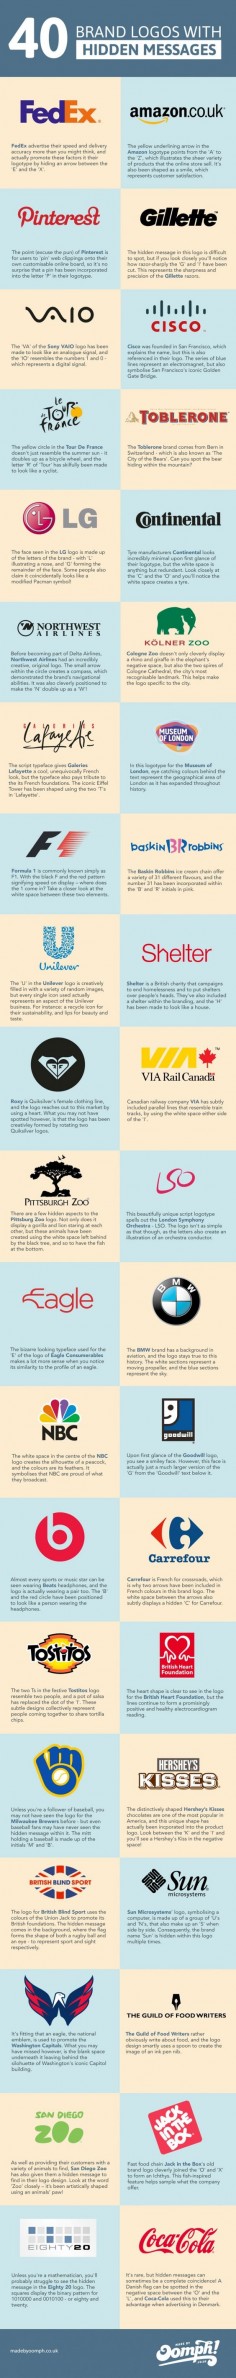 40 Logos With Hidden Messages, I find things like this really interesting and they also inspire me to create hidden messages within my logos.